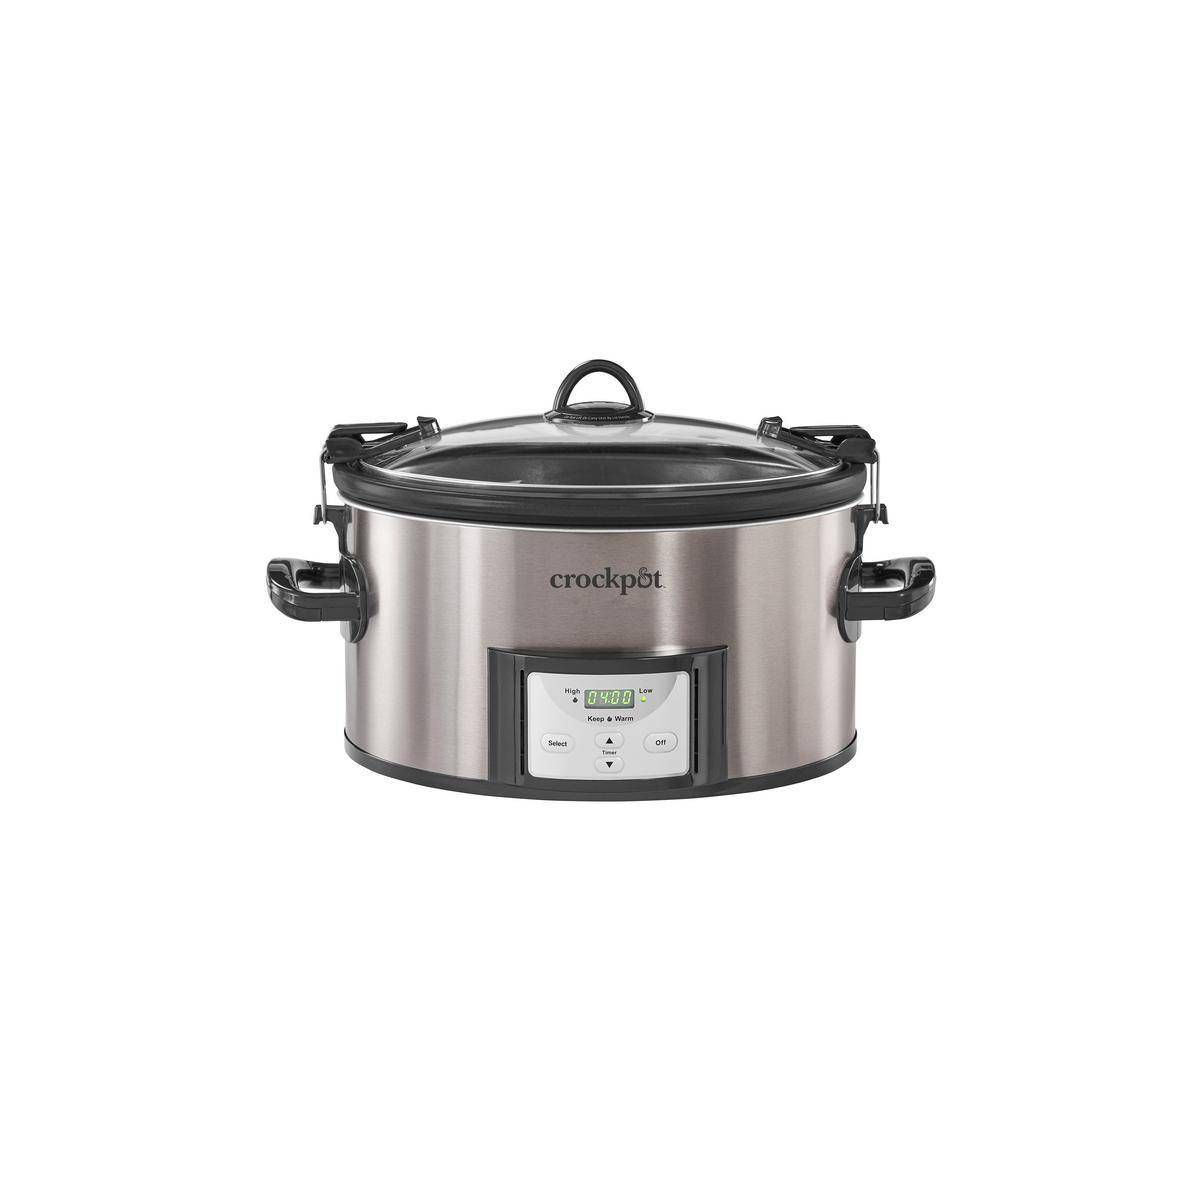 Crock-Pot 7qt Cook & Carry Programmable Slow Cooker - Stainless Steel | Target